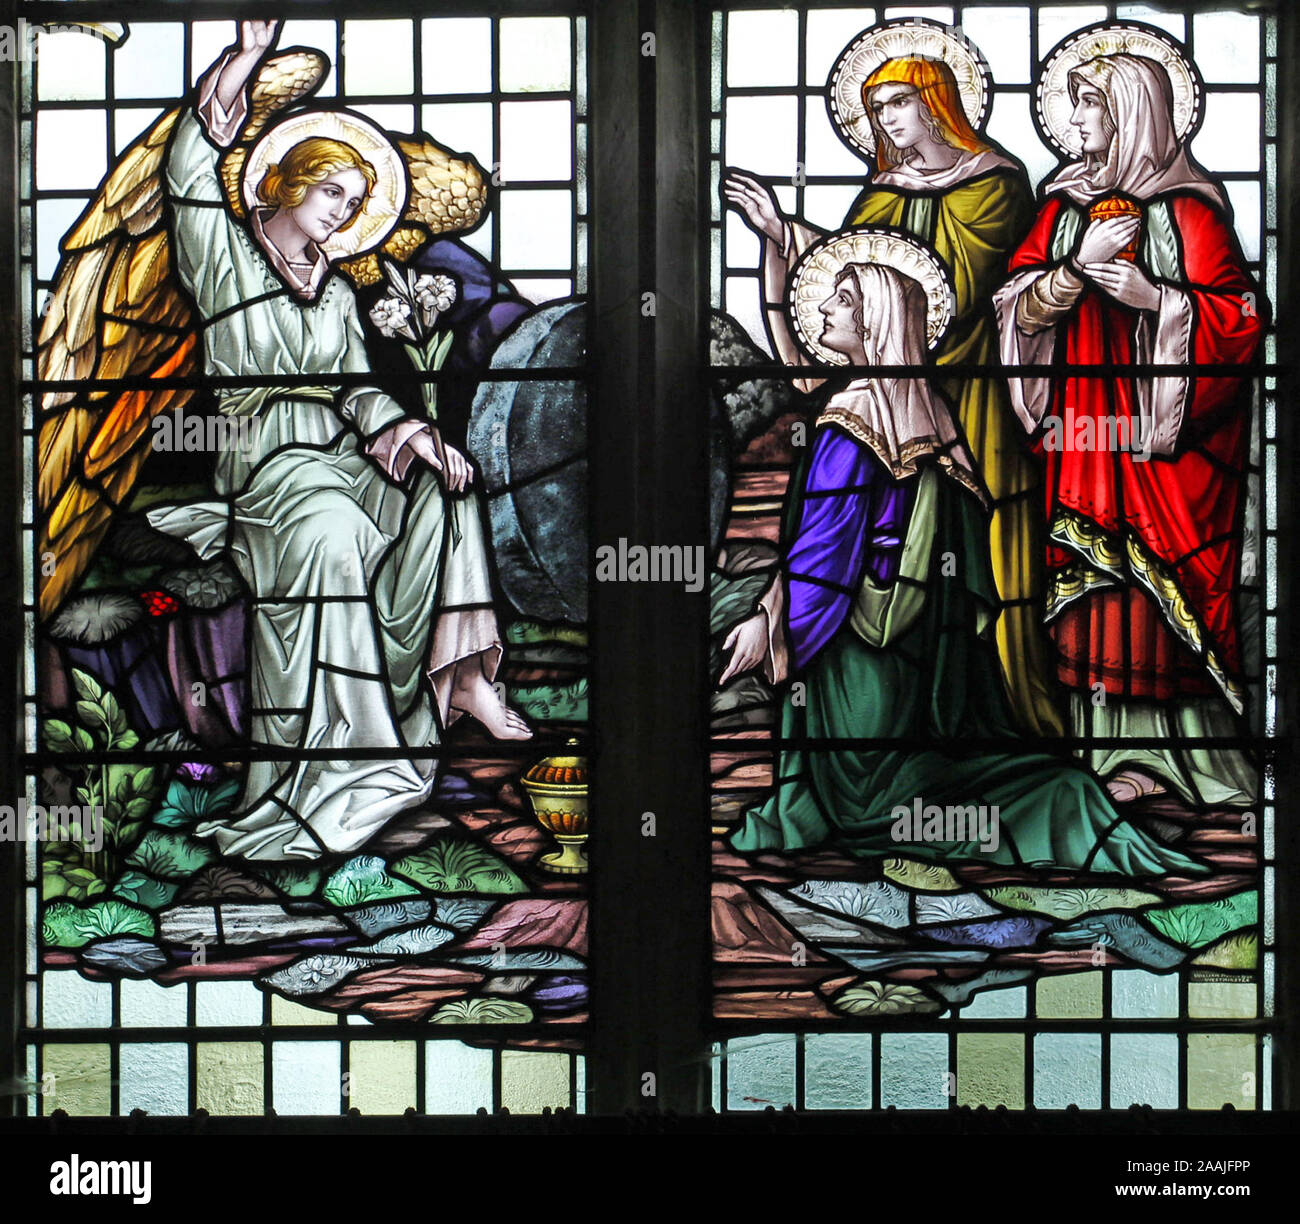 Stained glass window by William Morris & Co.depicting The Three Maries at the Sepulchre, St Swithin's Church, Ashmanhaugh, Norfolk Stock Photo